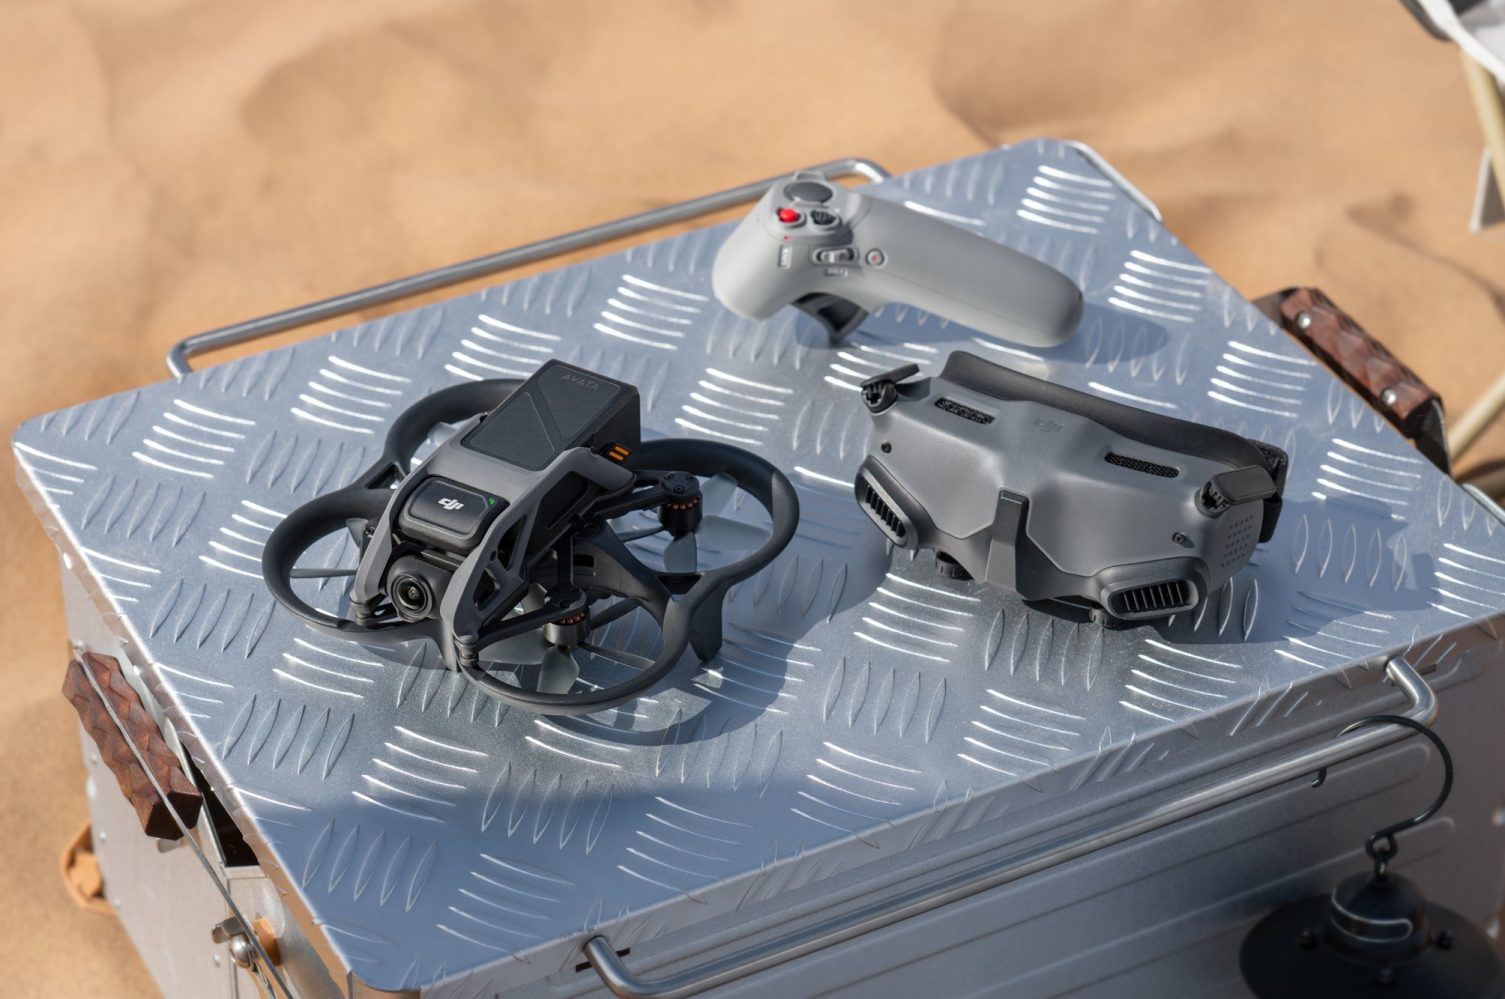 DJI Avata drone adds support to use goggles with O3 Air Unit